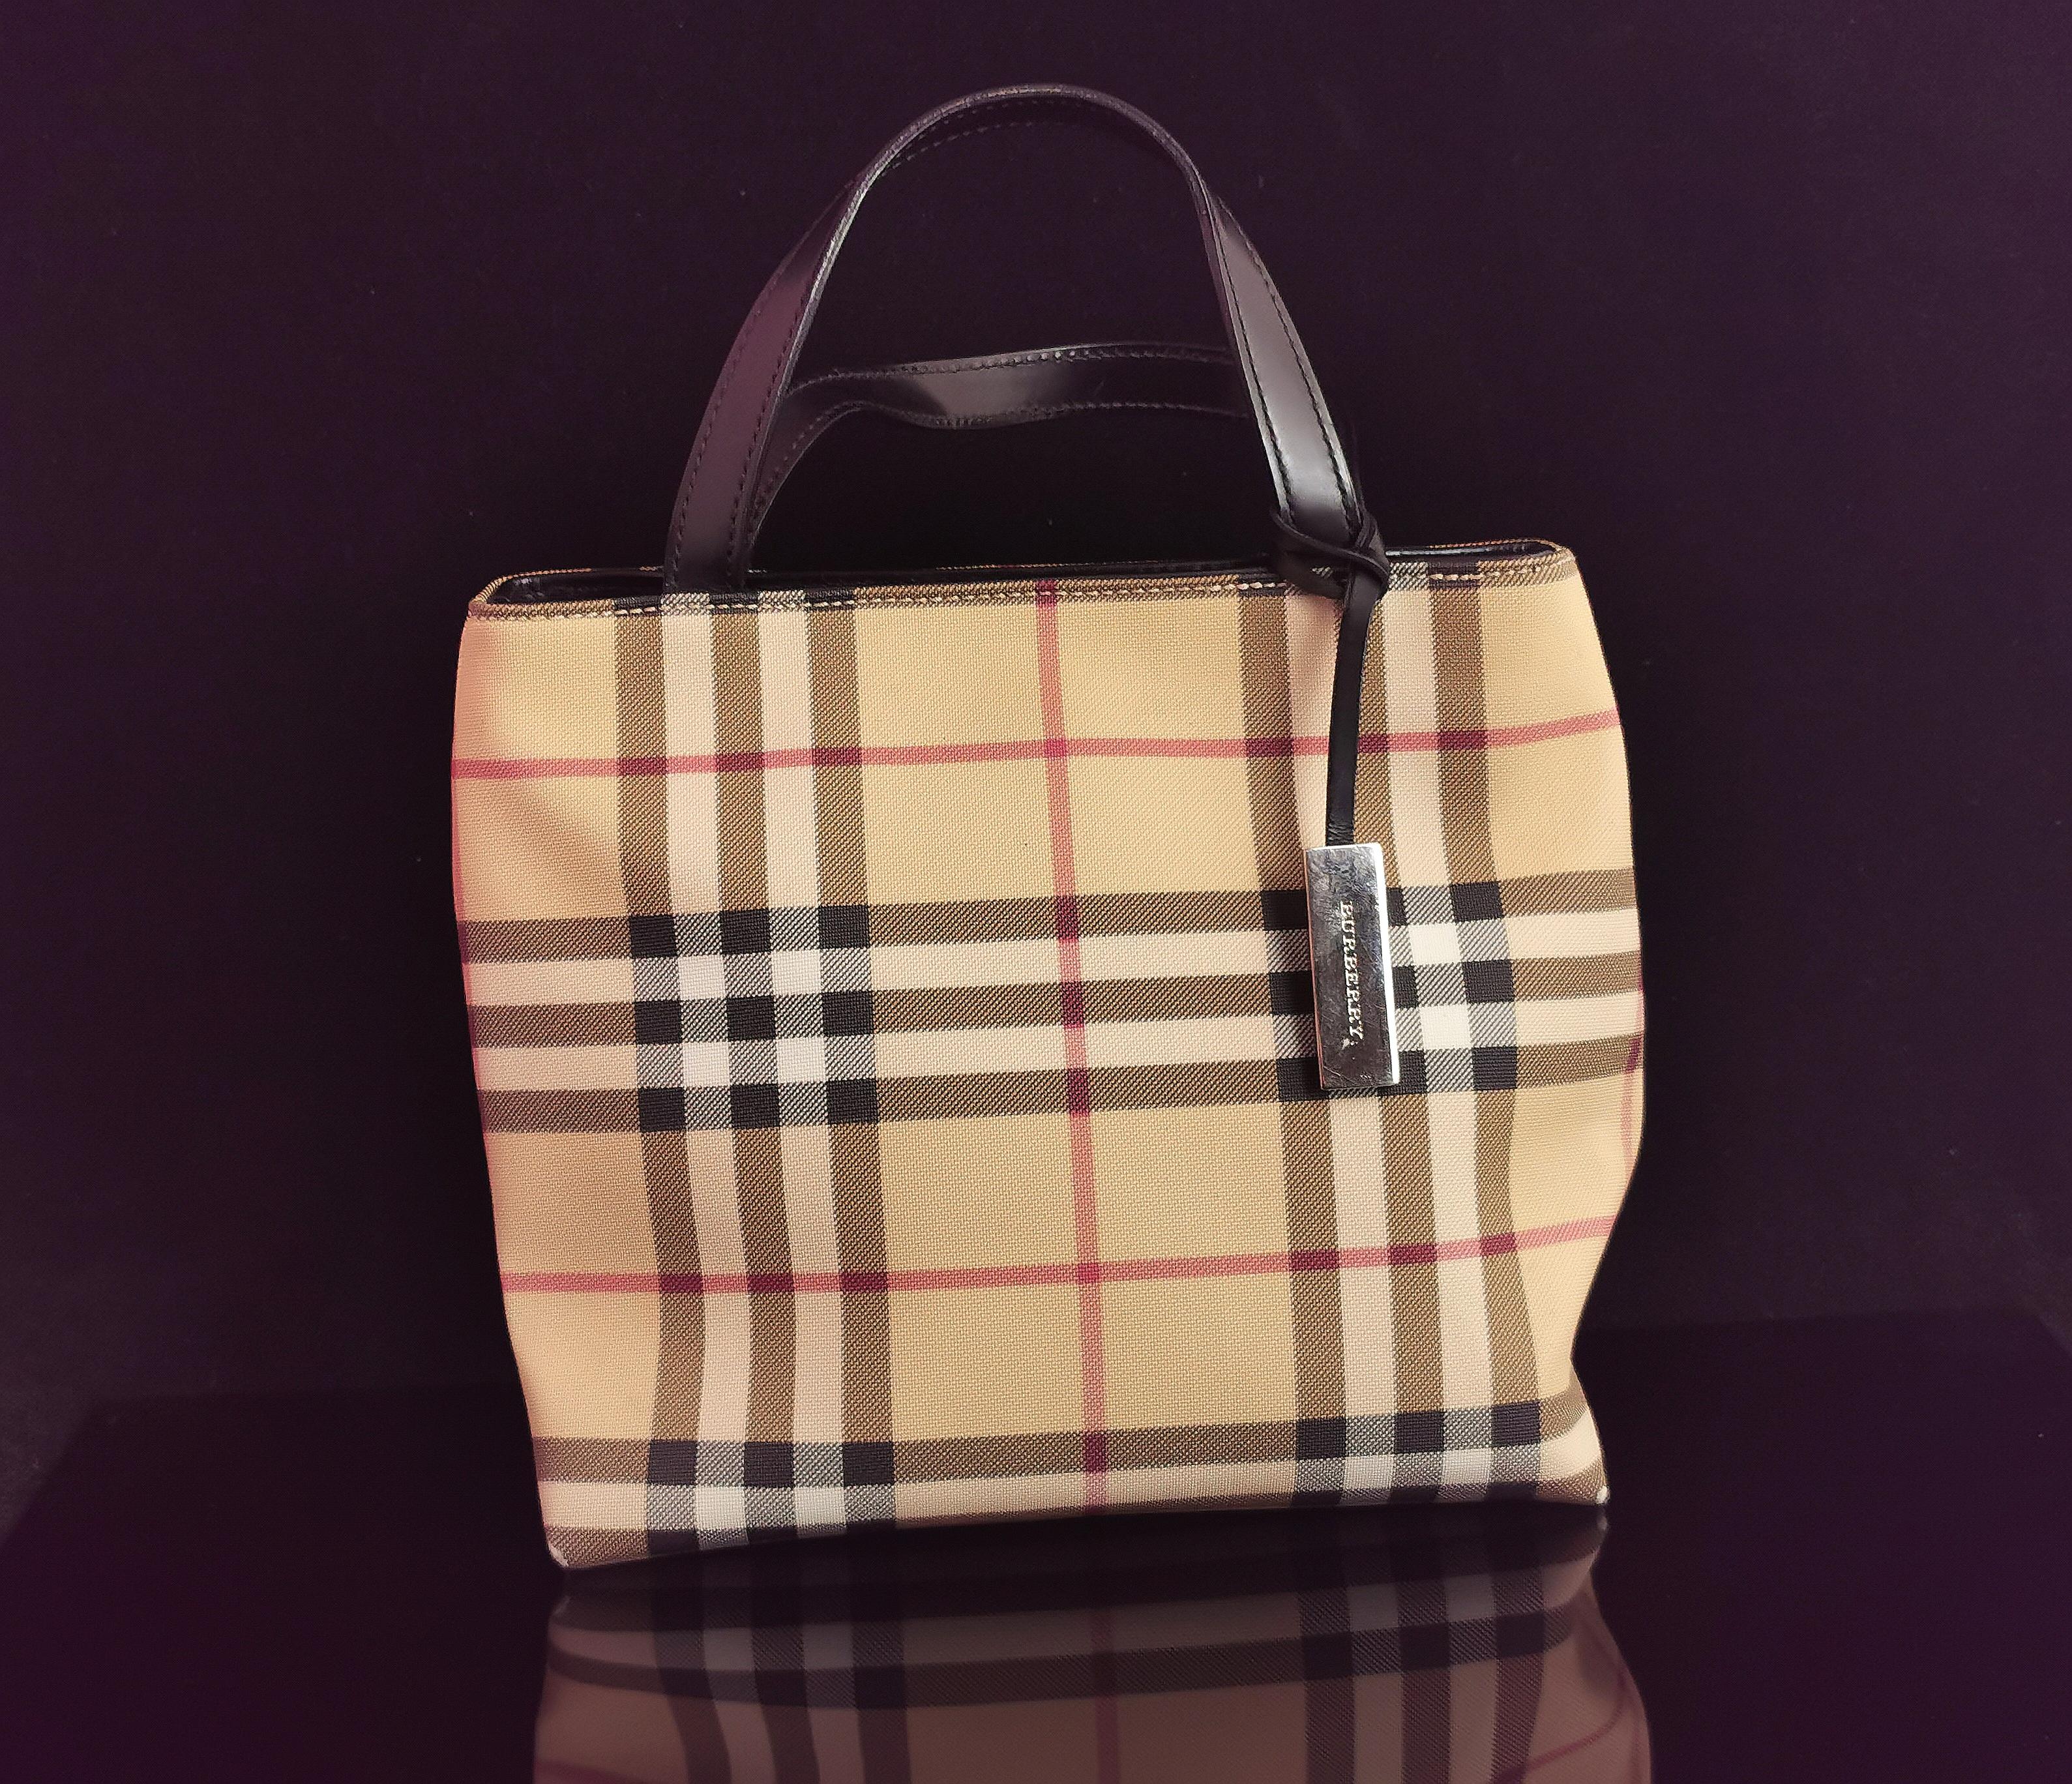 A stylish vintage Burberry mini tote bag.

Classic Nova check in a lightly coated canvas.

It has a black leather handle and silver tone hardware branded.

Inside the purse there is the Burberry branding on a leather tag, a small zipped compartment